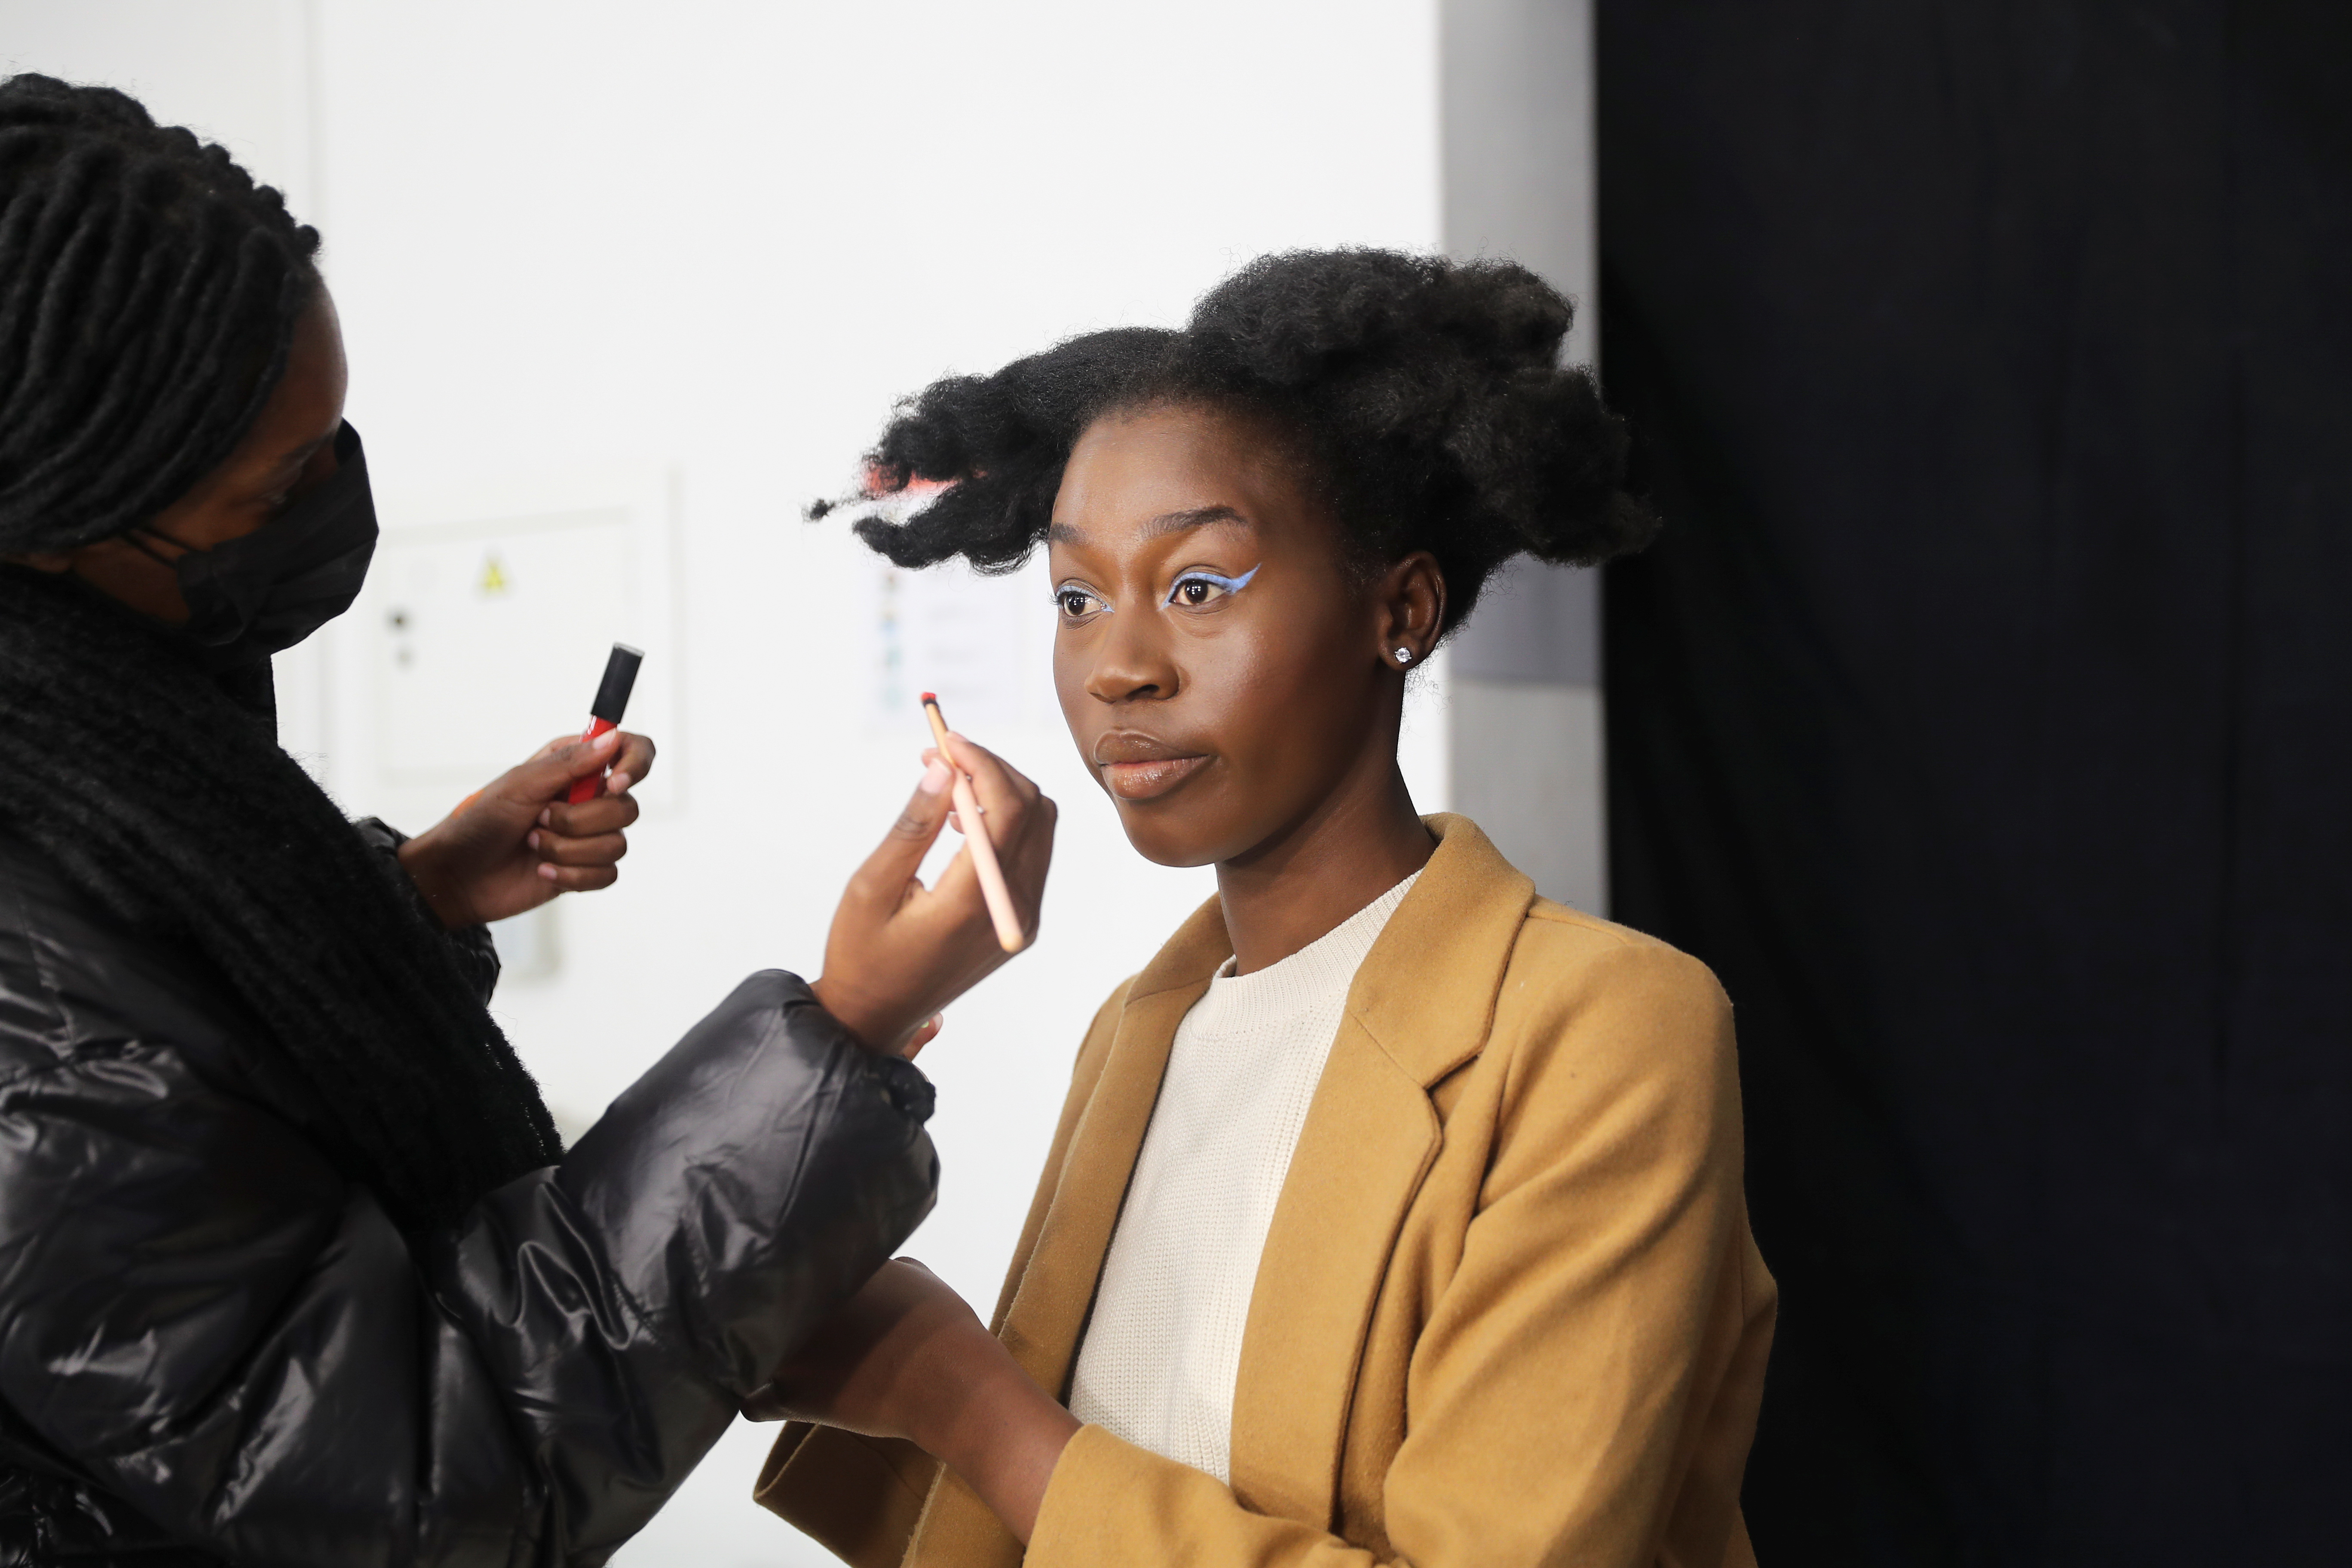 Lehlogonolo Machaba, the first openly transgender woman to compete for the Miss South Africa title has her makeup done before a photo shoot in Johannesburg